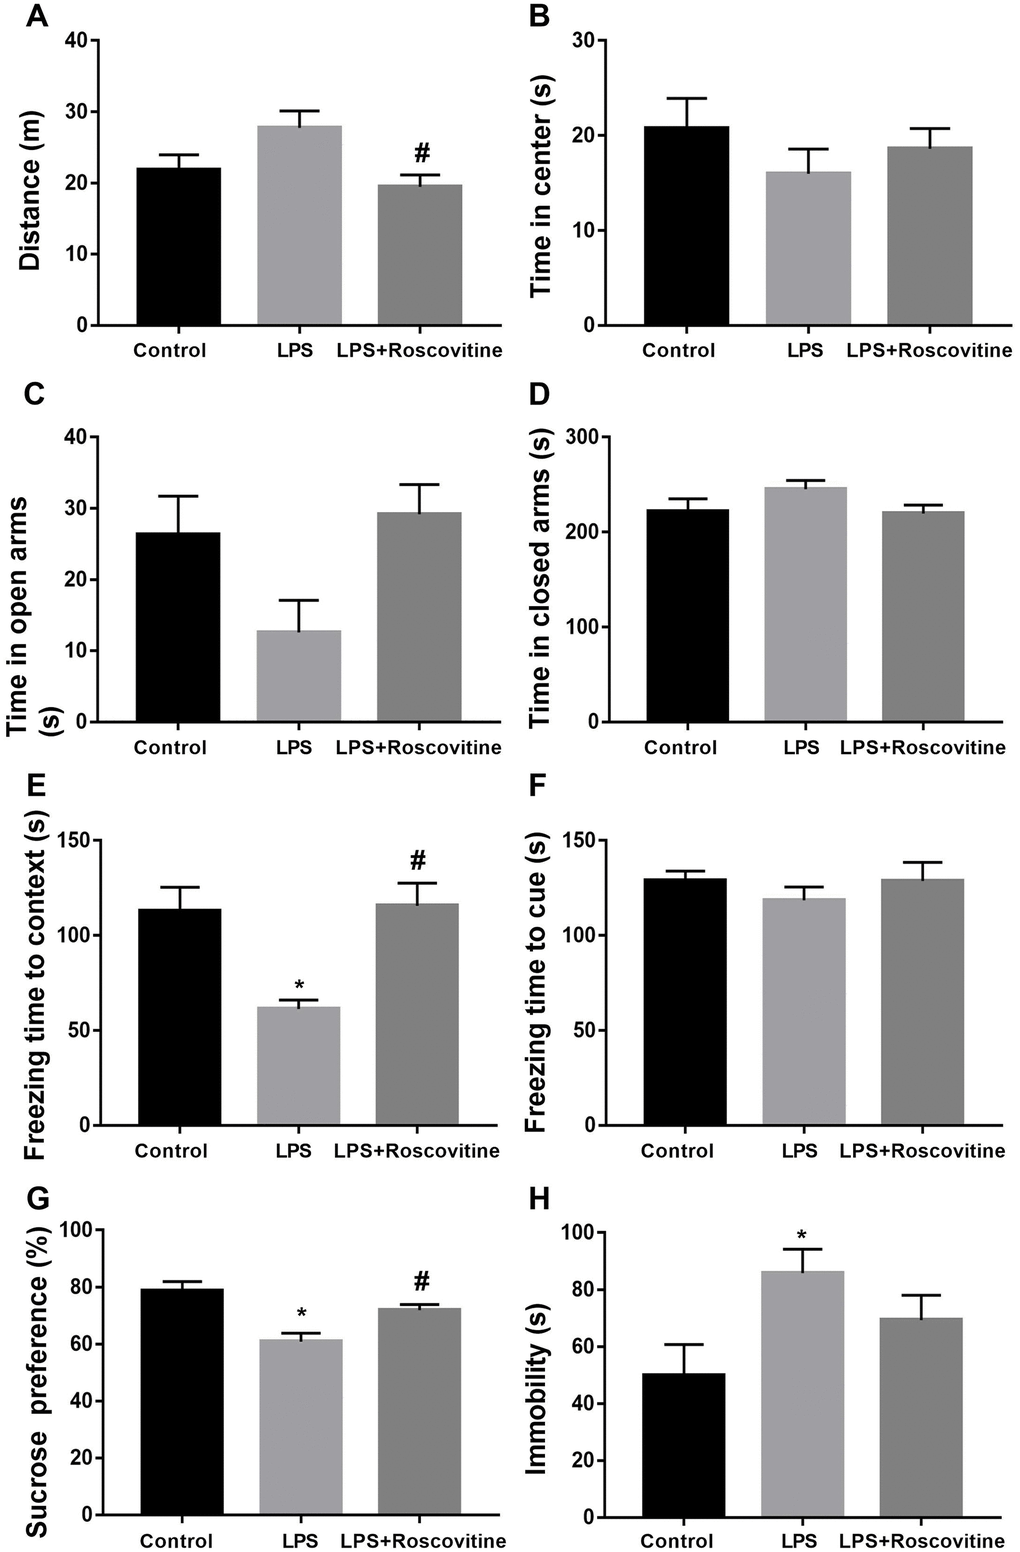 LPS-induced neurobehavioral abnormities were attenuated by roscovitine. (A) LPS had no effect on the total distance traveled, while roscovitine treatment significantly increased total distance traveled in LPS + roscovitine group compared with LPS group. (B) No difference in time spent in the center of the open arena was observed among groups. (C, D) There was no difference in time in the open arms and closed arms between groups. (E) LPS-induced significantly decreased the freezing time to context was reversed by roscovitine treatment. (F) There was no difference in freezing time to tone in the auditory-cued fear test among groups. (G) Decreased preference for sucrose in LPS-exposed mice was reversed by roscovitine treatment. (H) LPS significantly increased immobility compared with control group, which was not prevented by roscovitine treatment. Data are presented as the mean ± SEM, n = 10-12, *P P 